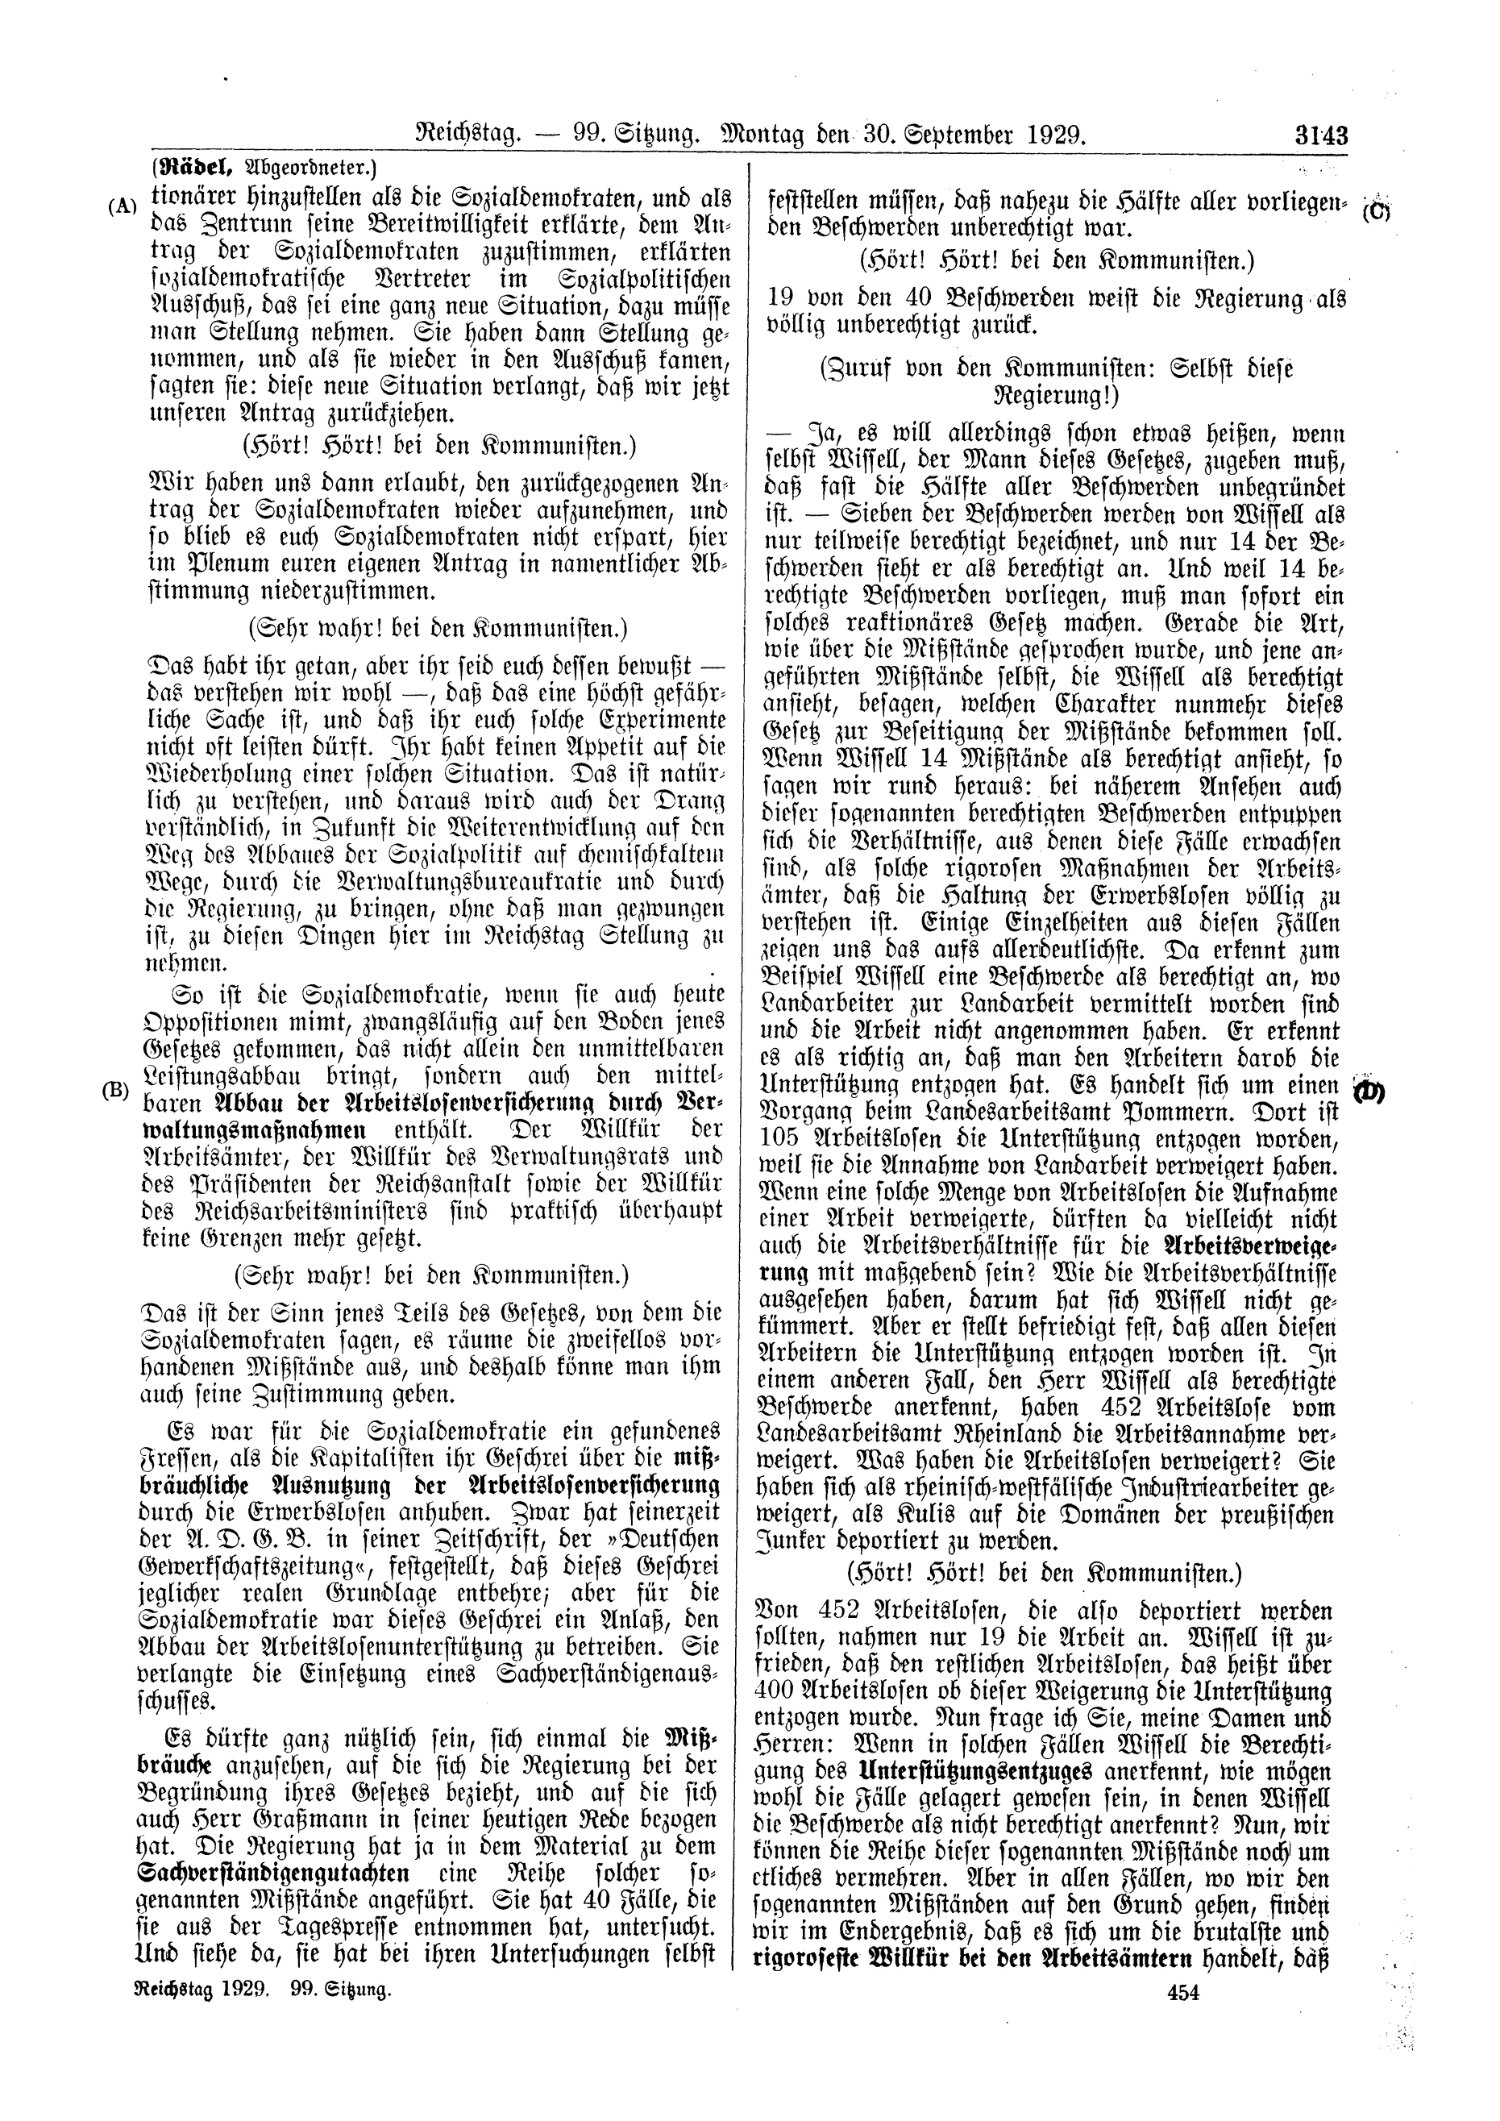 Scan of page 3143